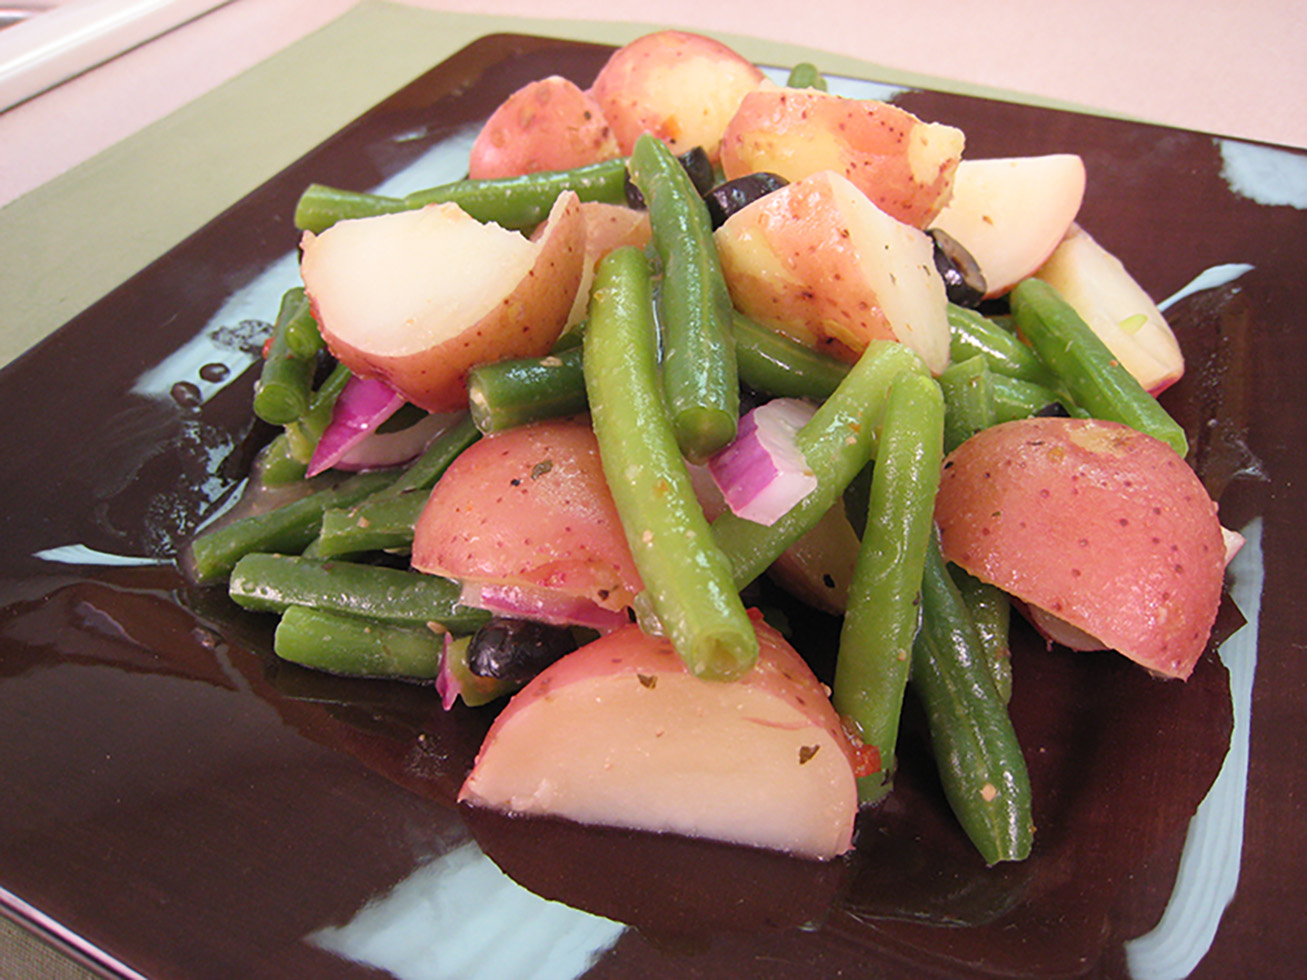 New potato and green bean salad served on a plate.